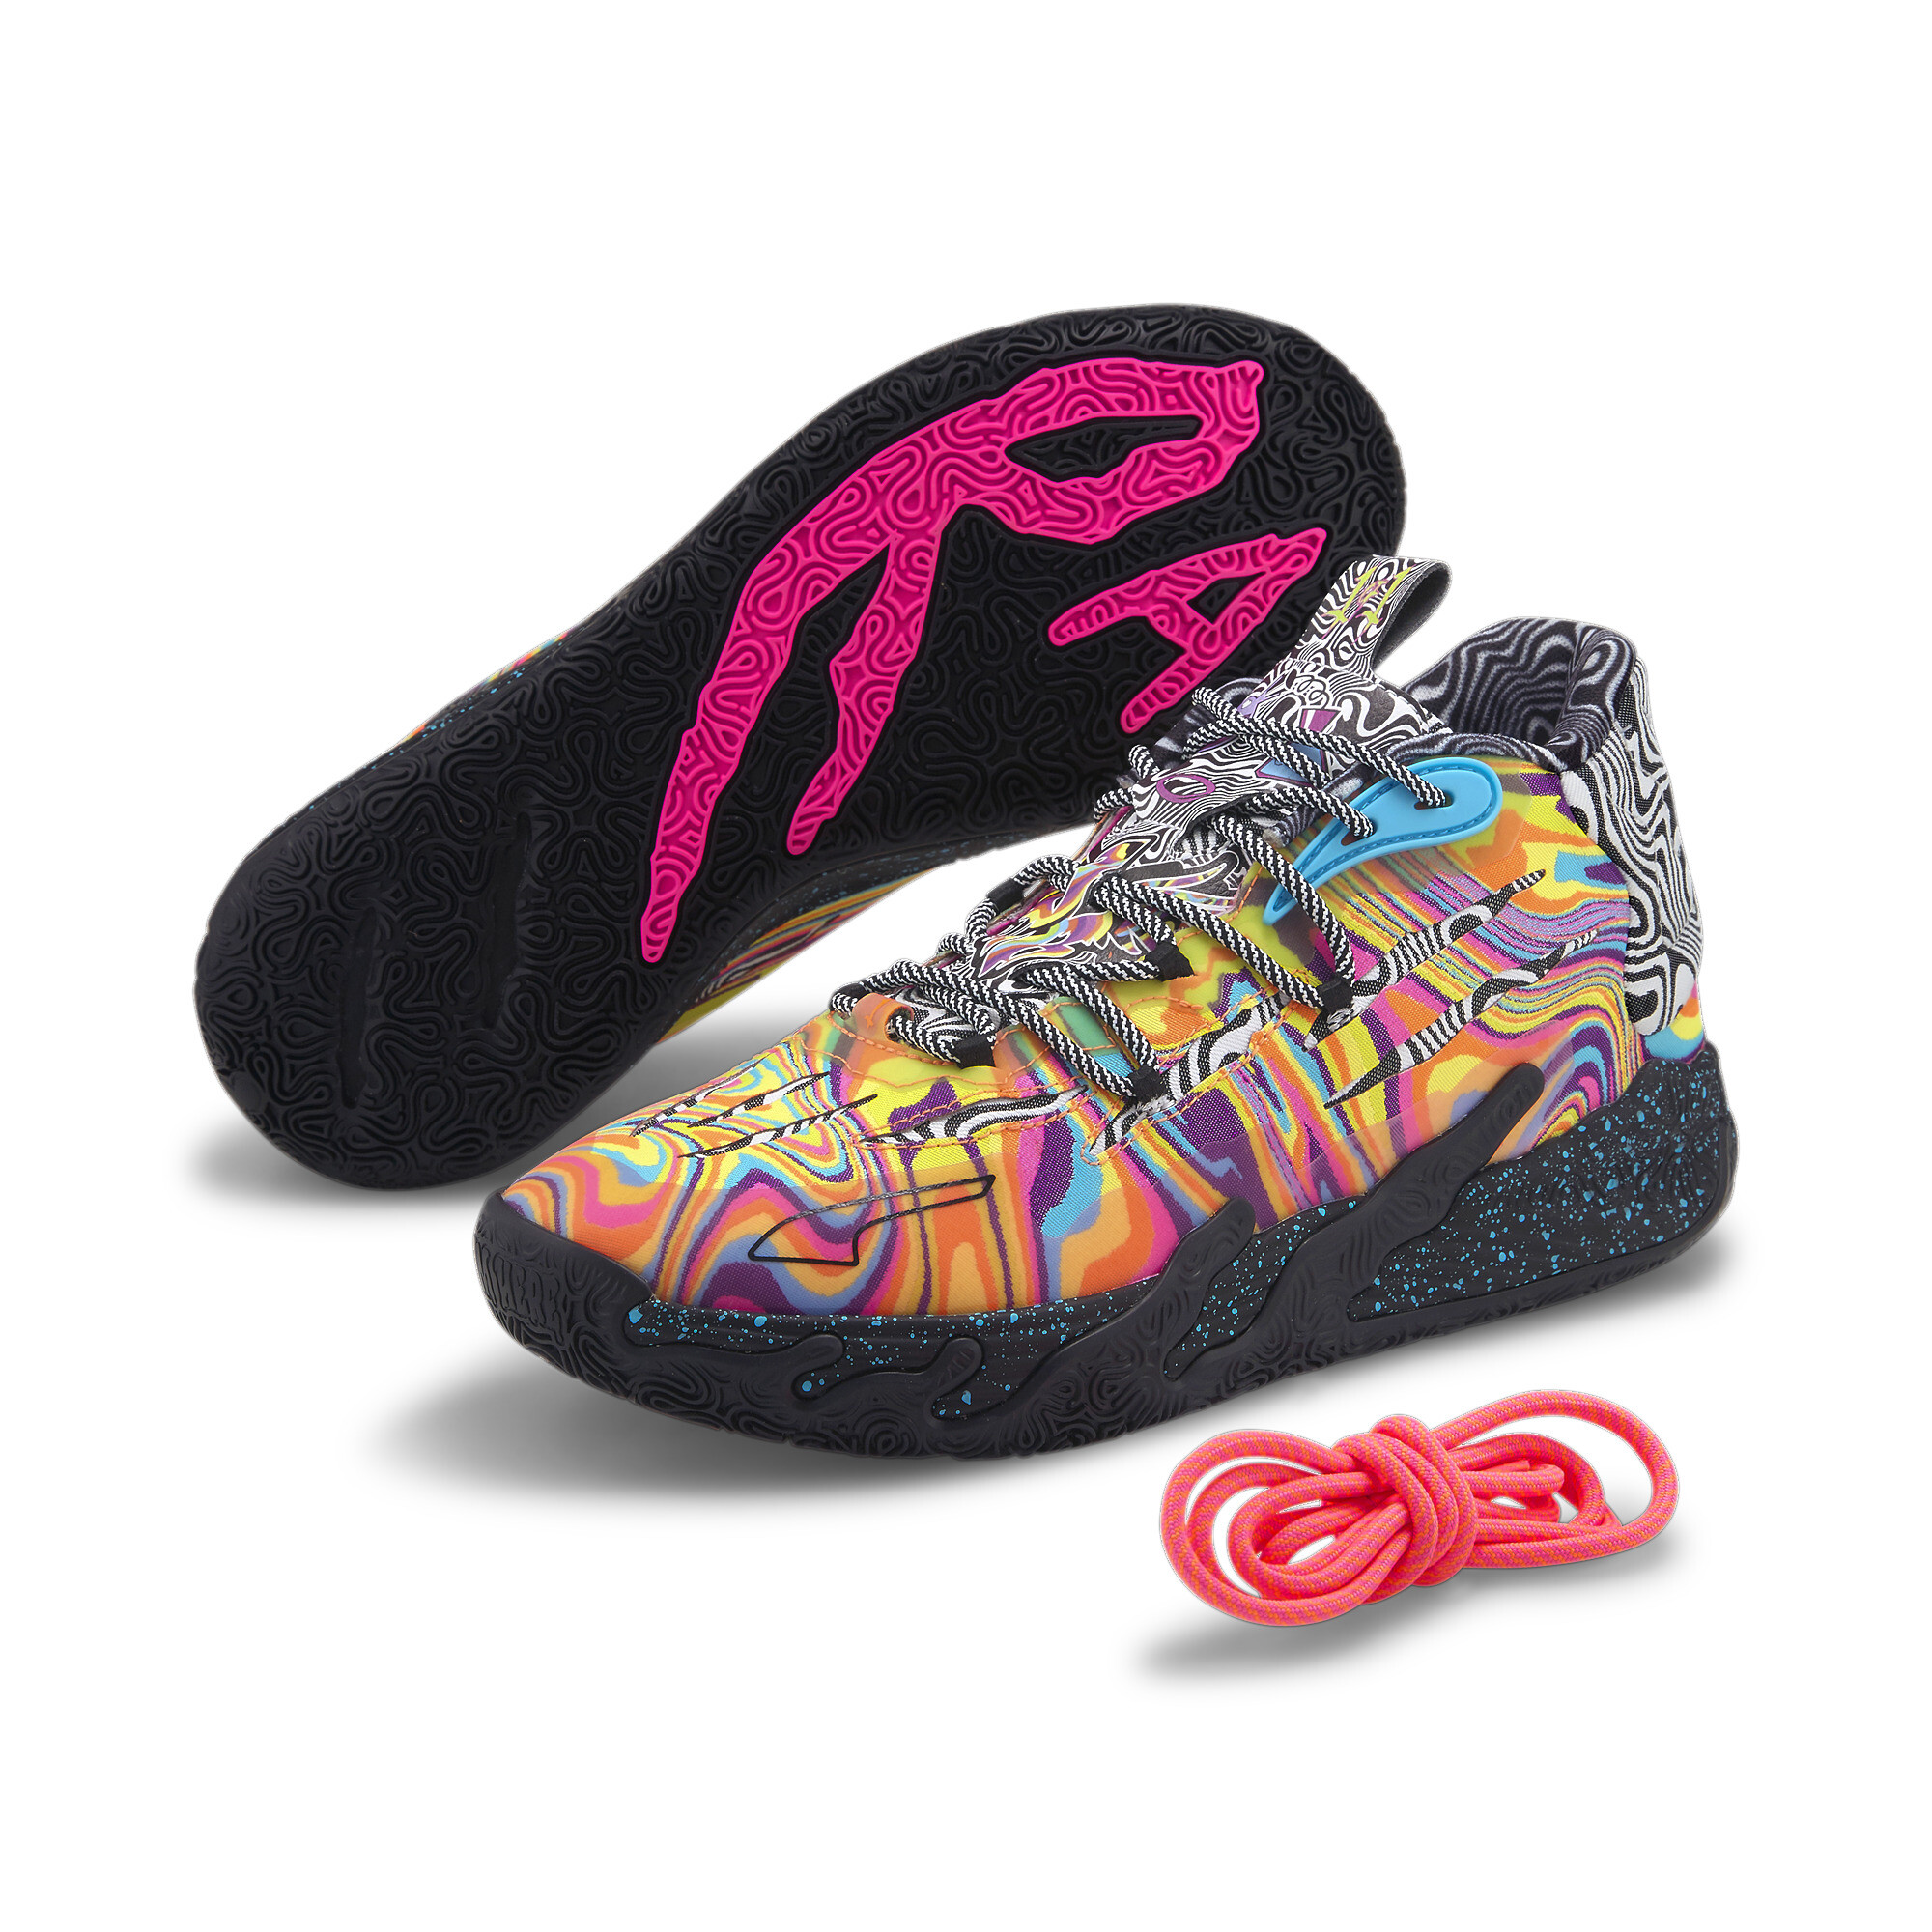 Puma MB.03 Dexter's Laboratory Basketball Shoes, Pink, Size 53.5, Shoes